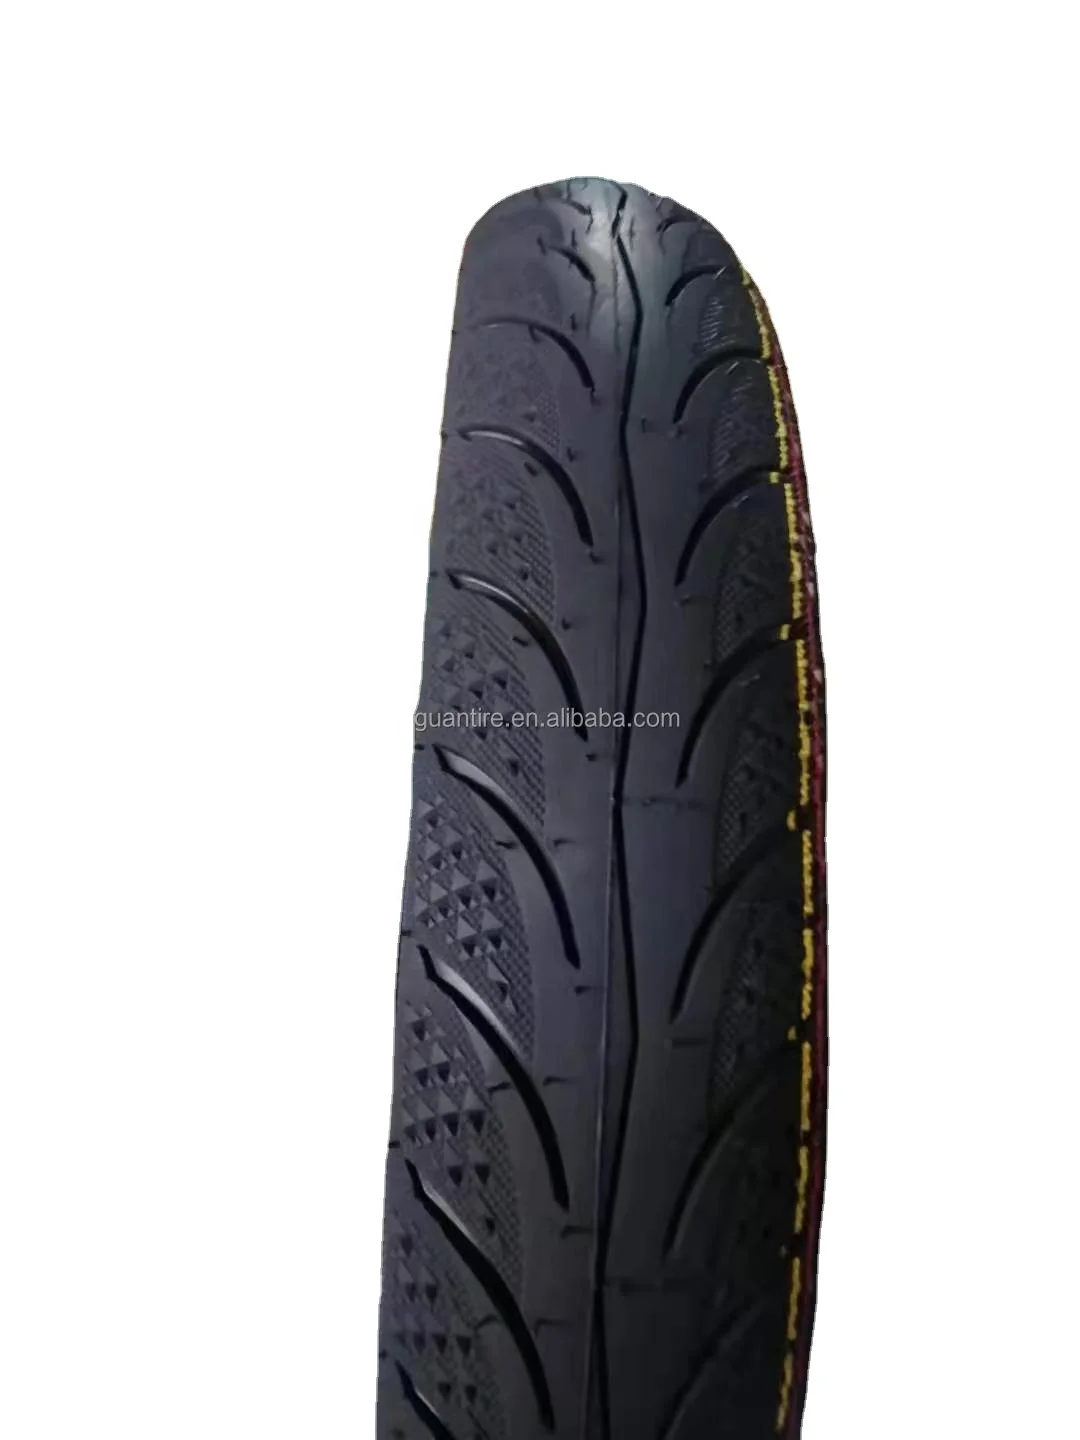 Motorcycle Tubeless Tire 110/80-17 120/80-17 140/60-17